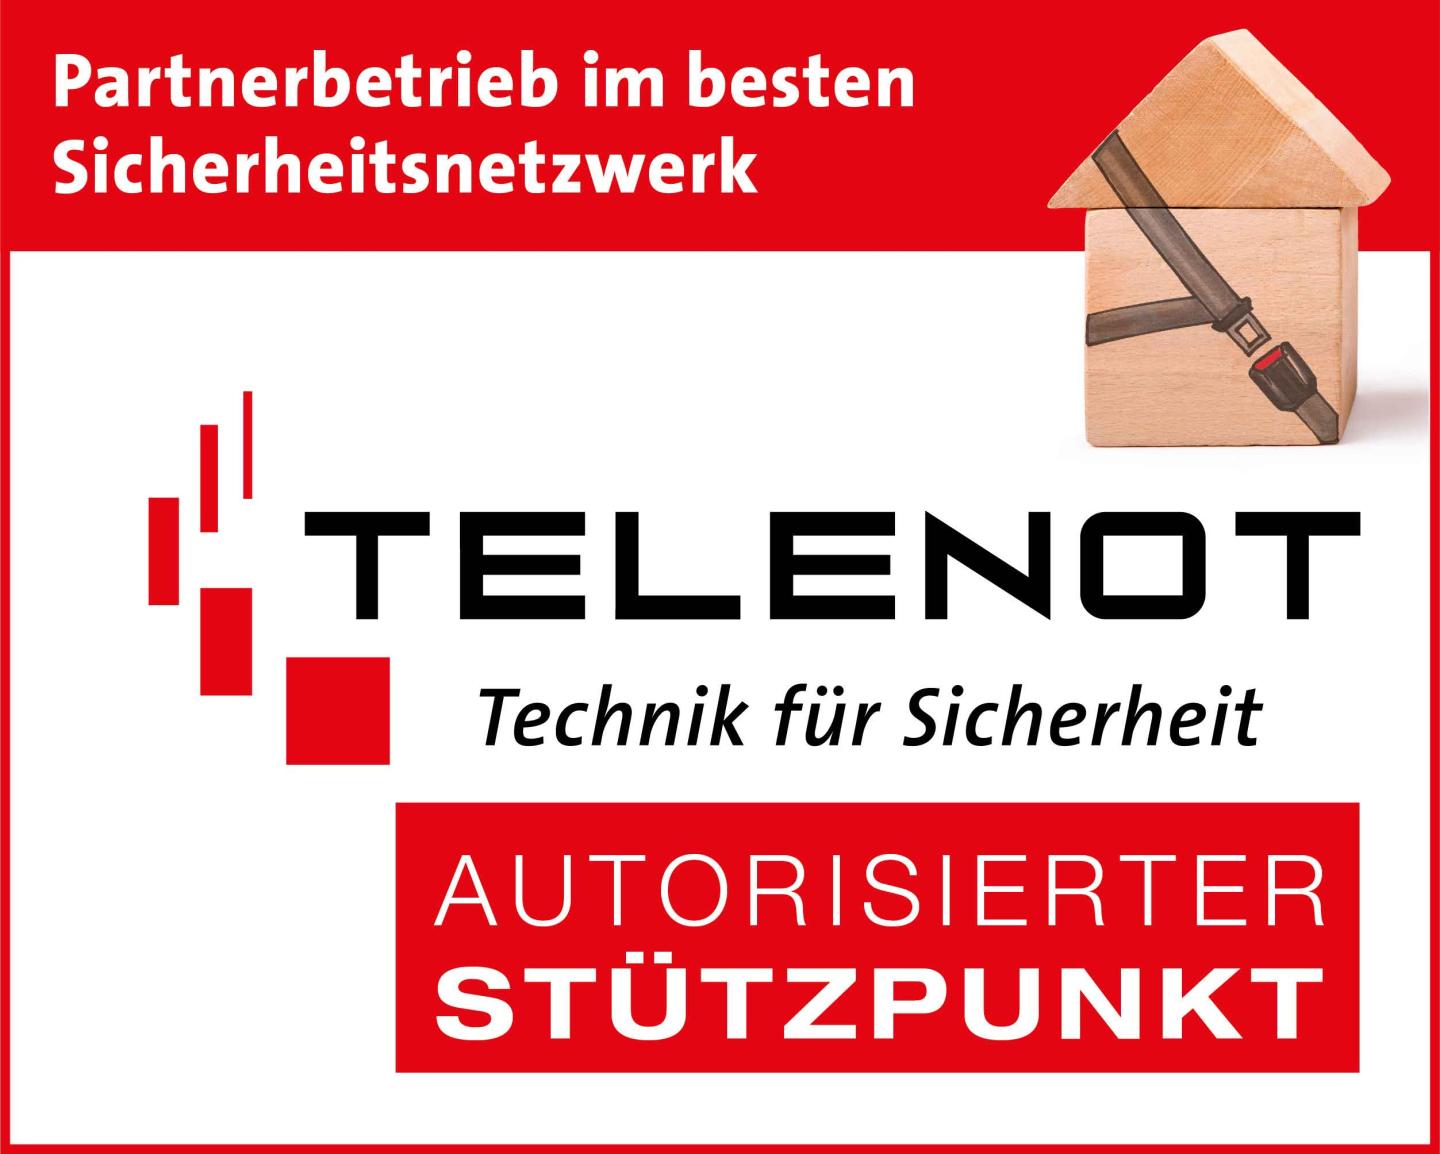 Security technology from Telenot available from HÖRMANN Warnsysteme